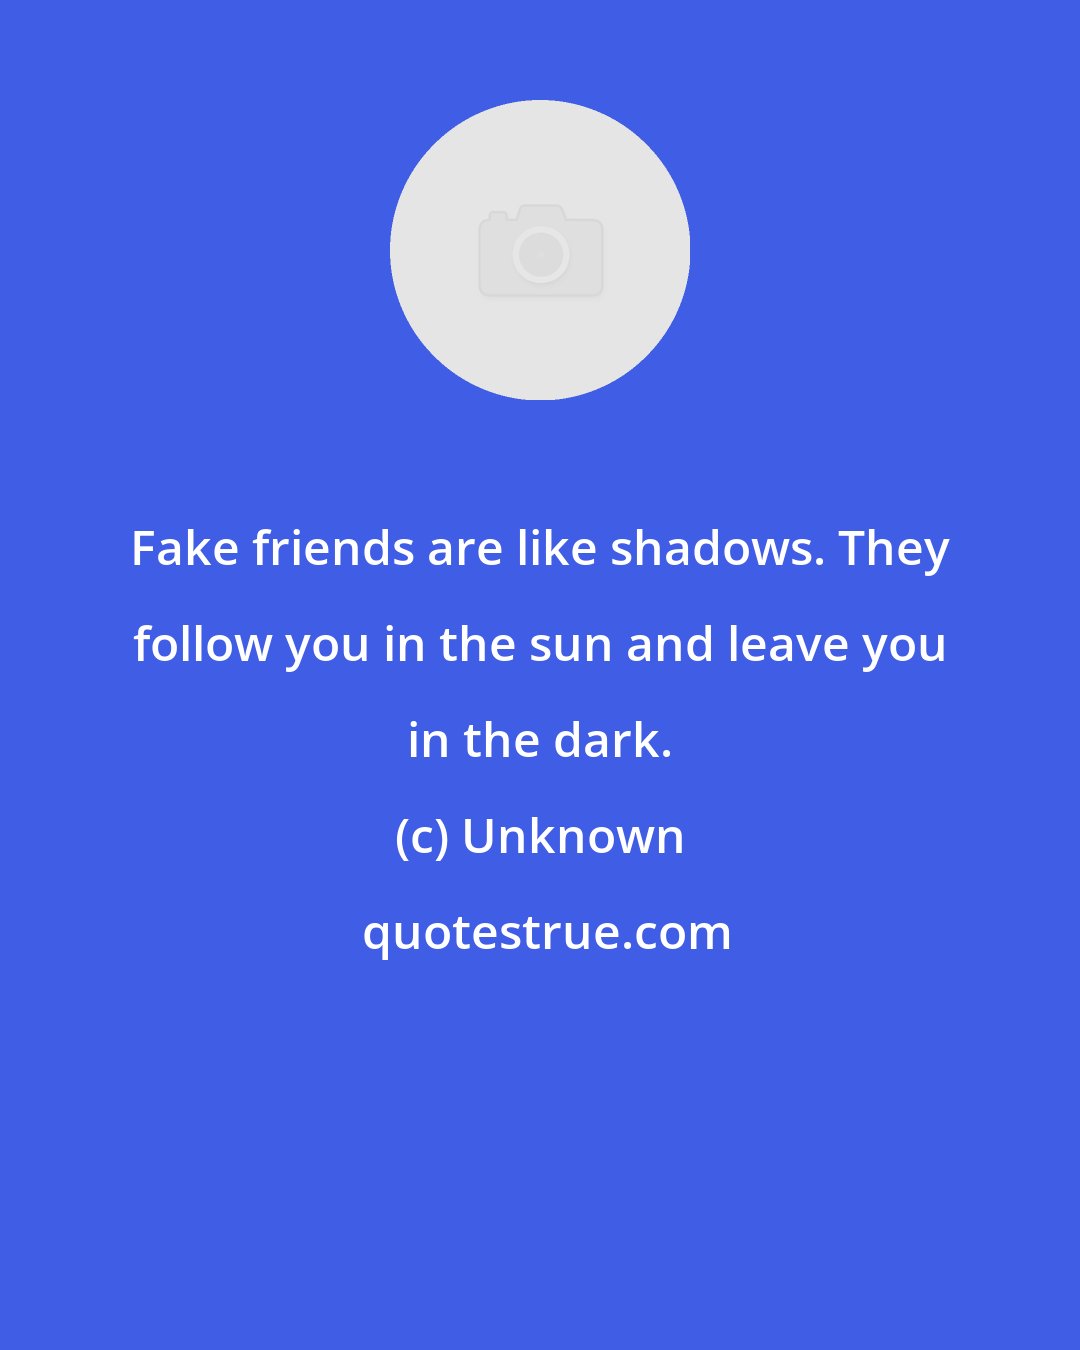 Unknown: Fake friends are like shadows. They follow you in the sun and leave you in the dark.